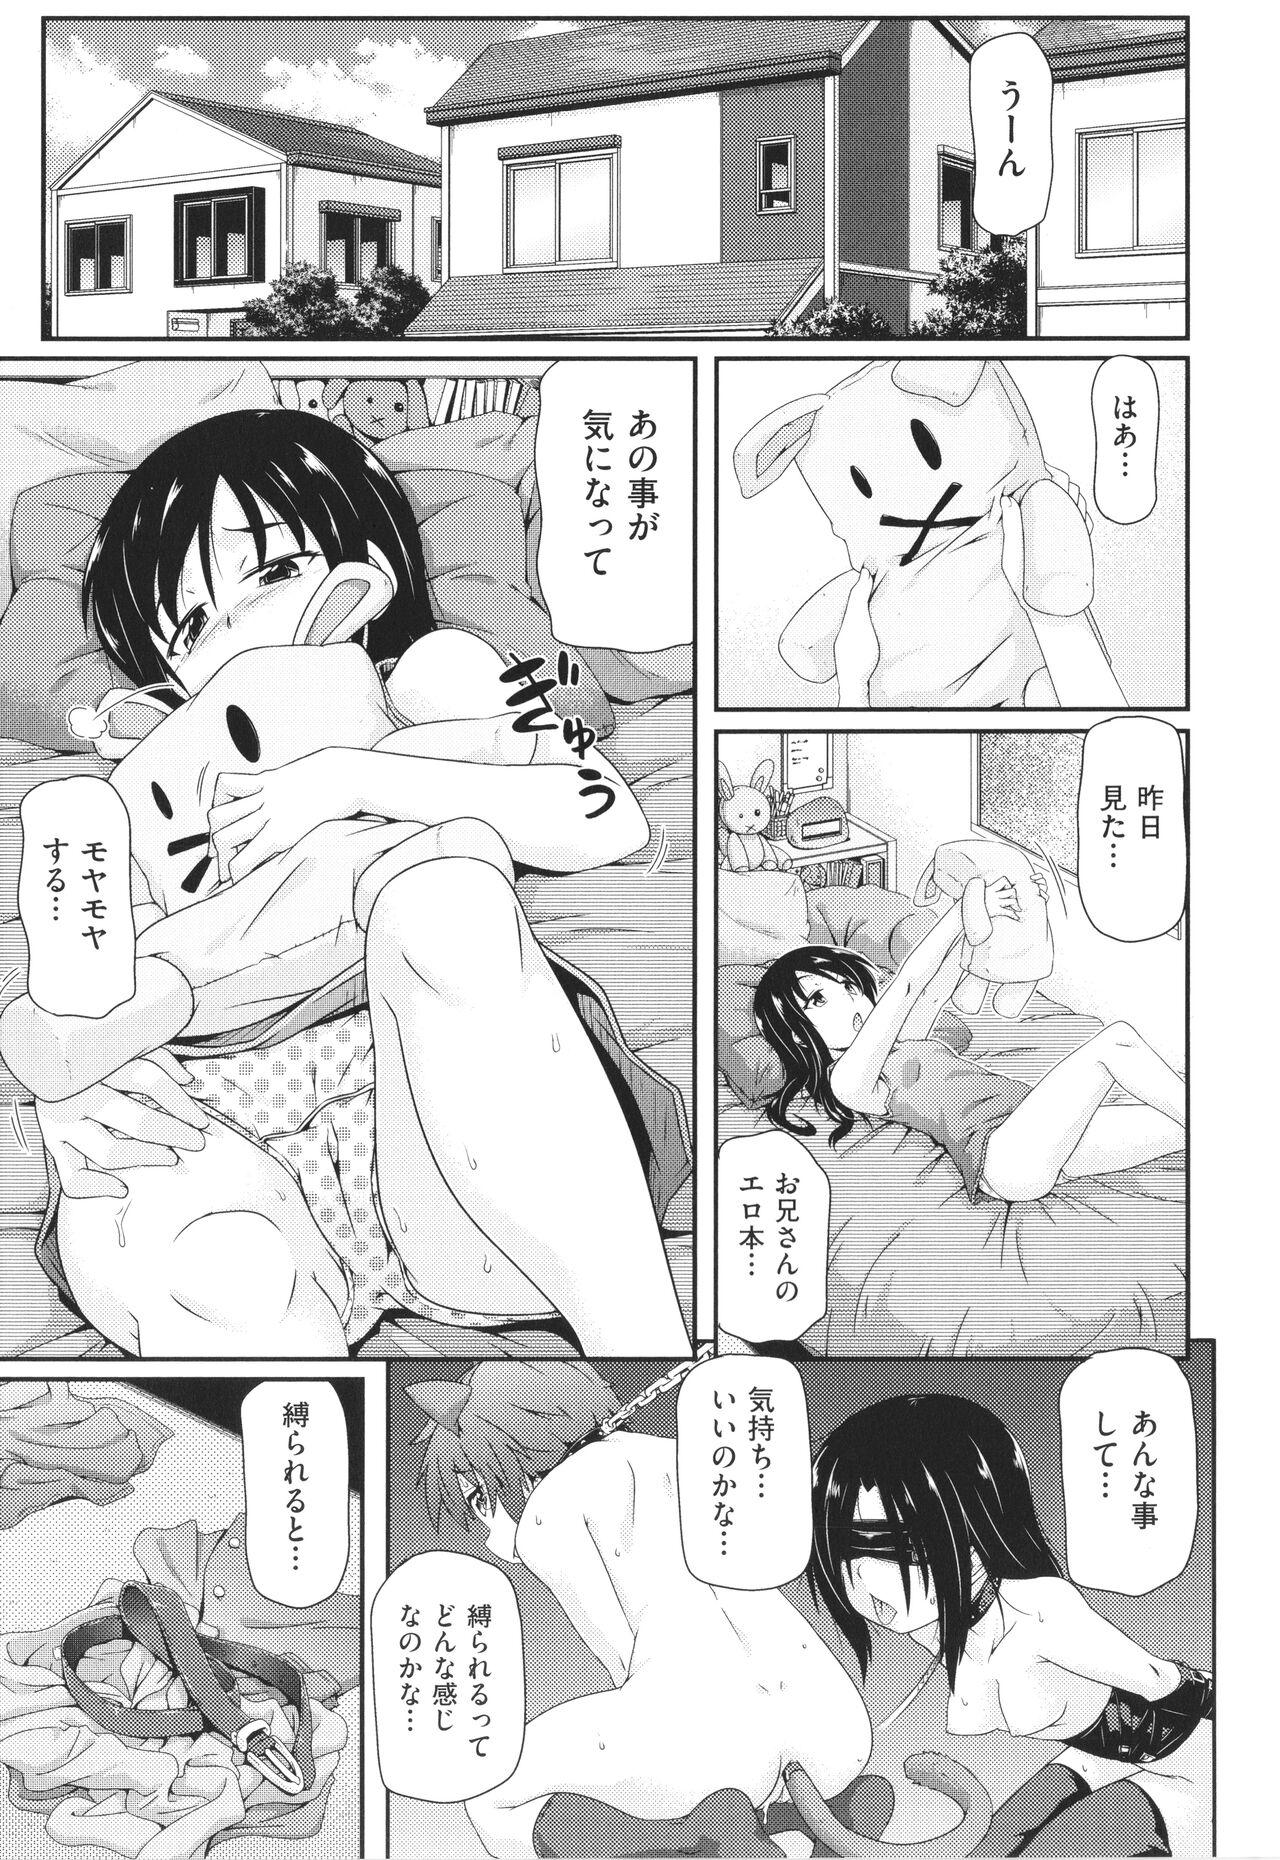 This Chiisame Blowjob Porn - Page 8